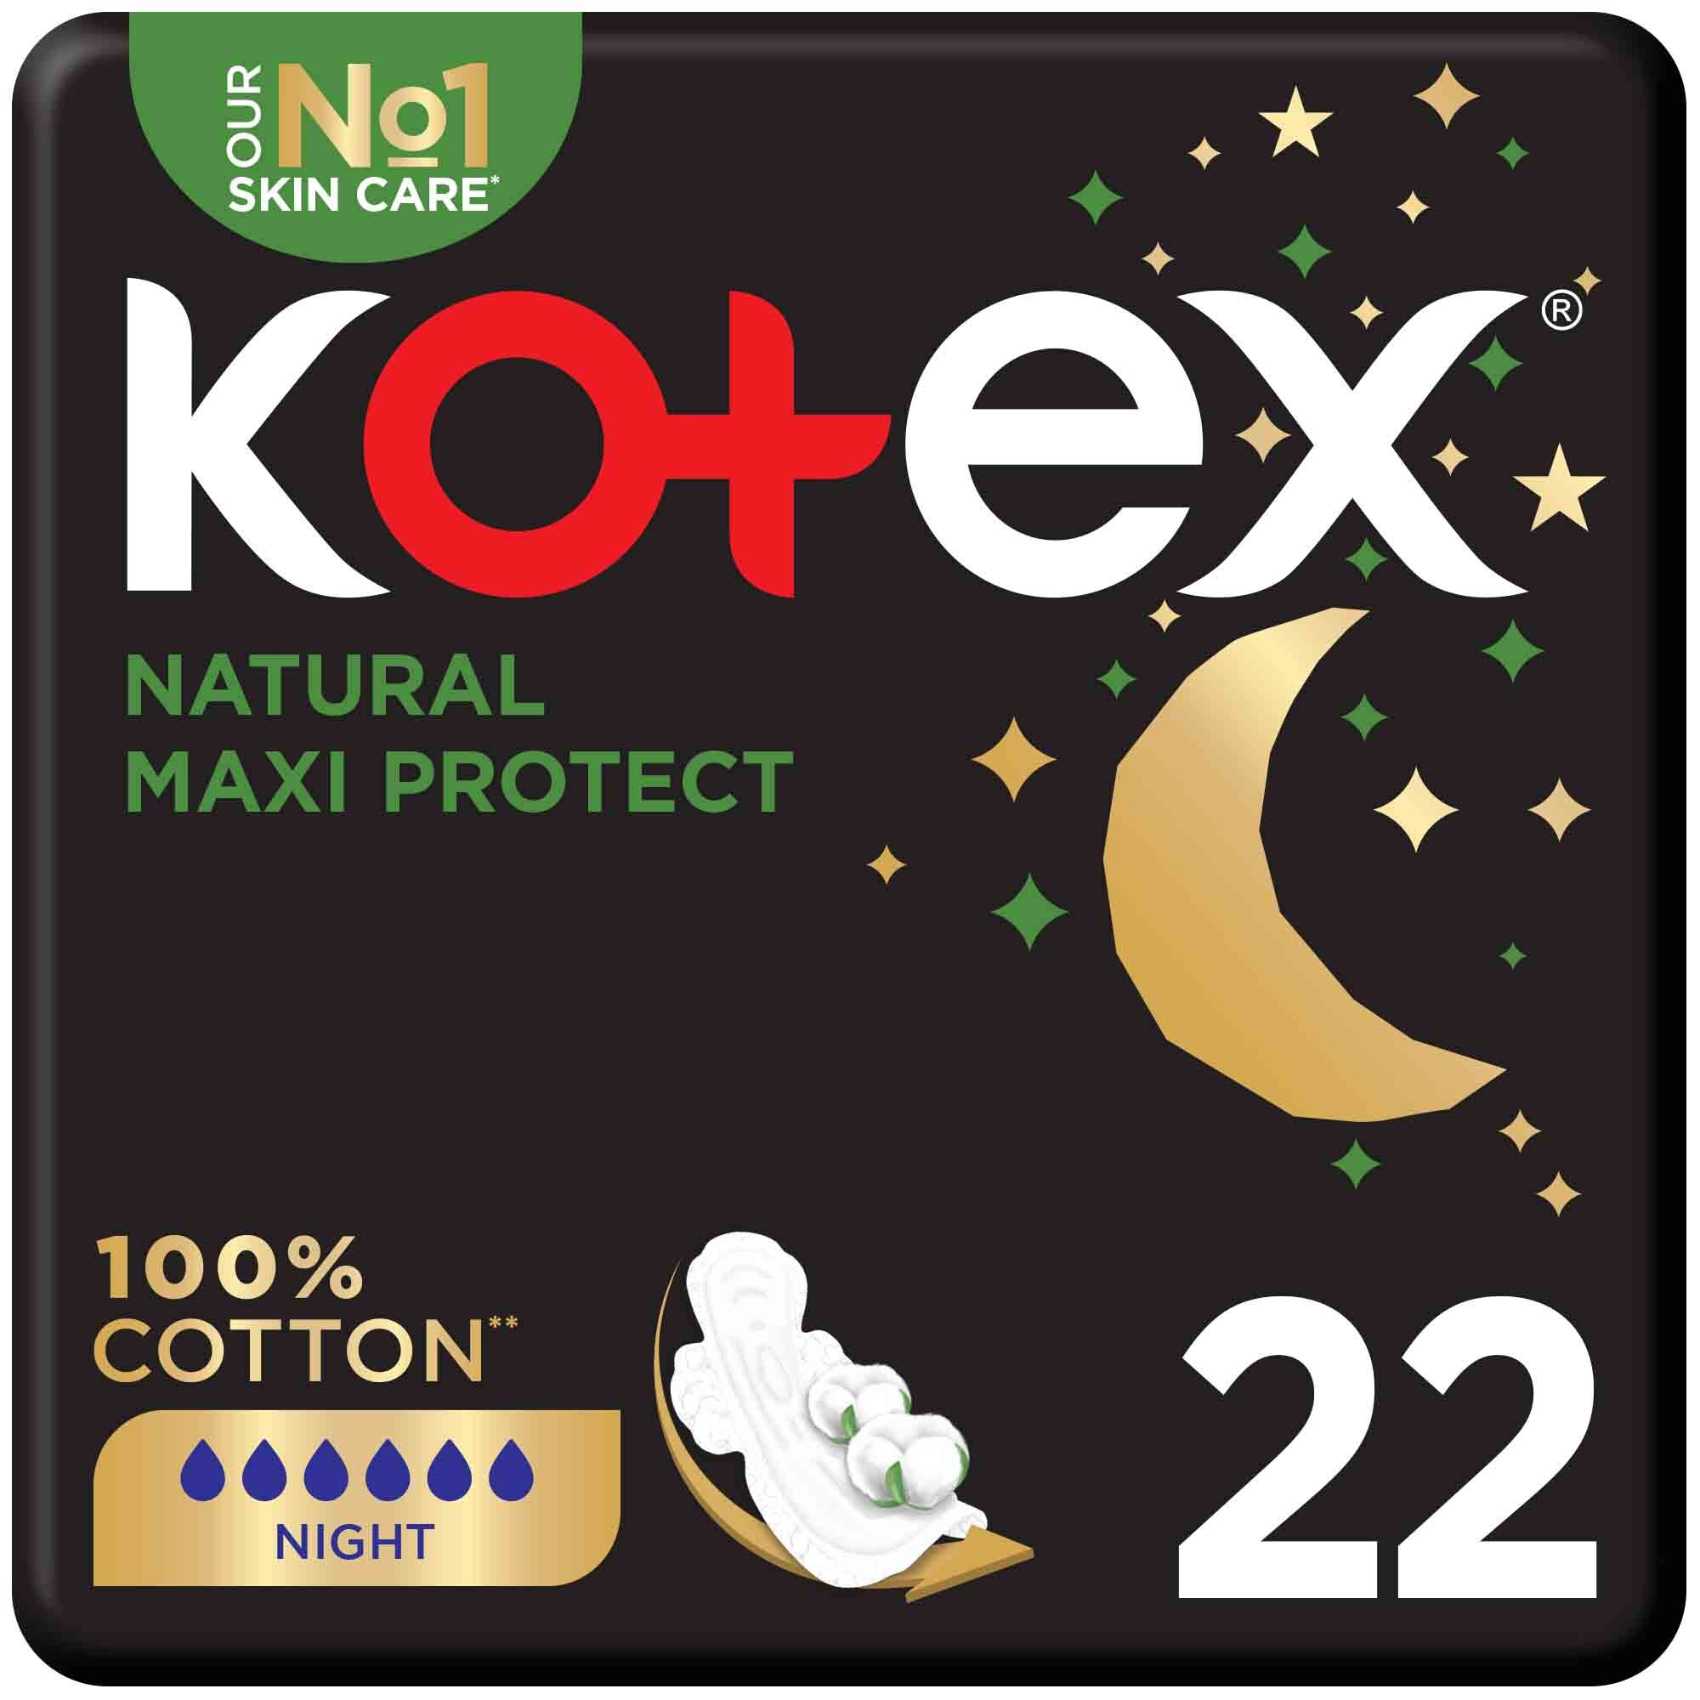 Kotex Natural Maxi Protect Thick Pads 100% Cotton Pad Overnight Protection Sanitary Pads with Wings 22 Sanitary Pads